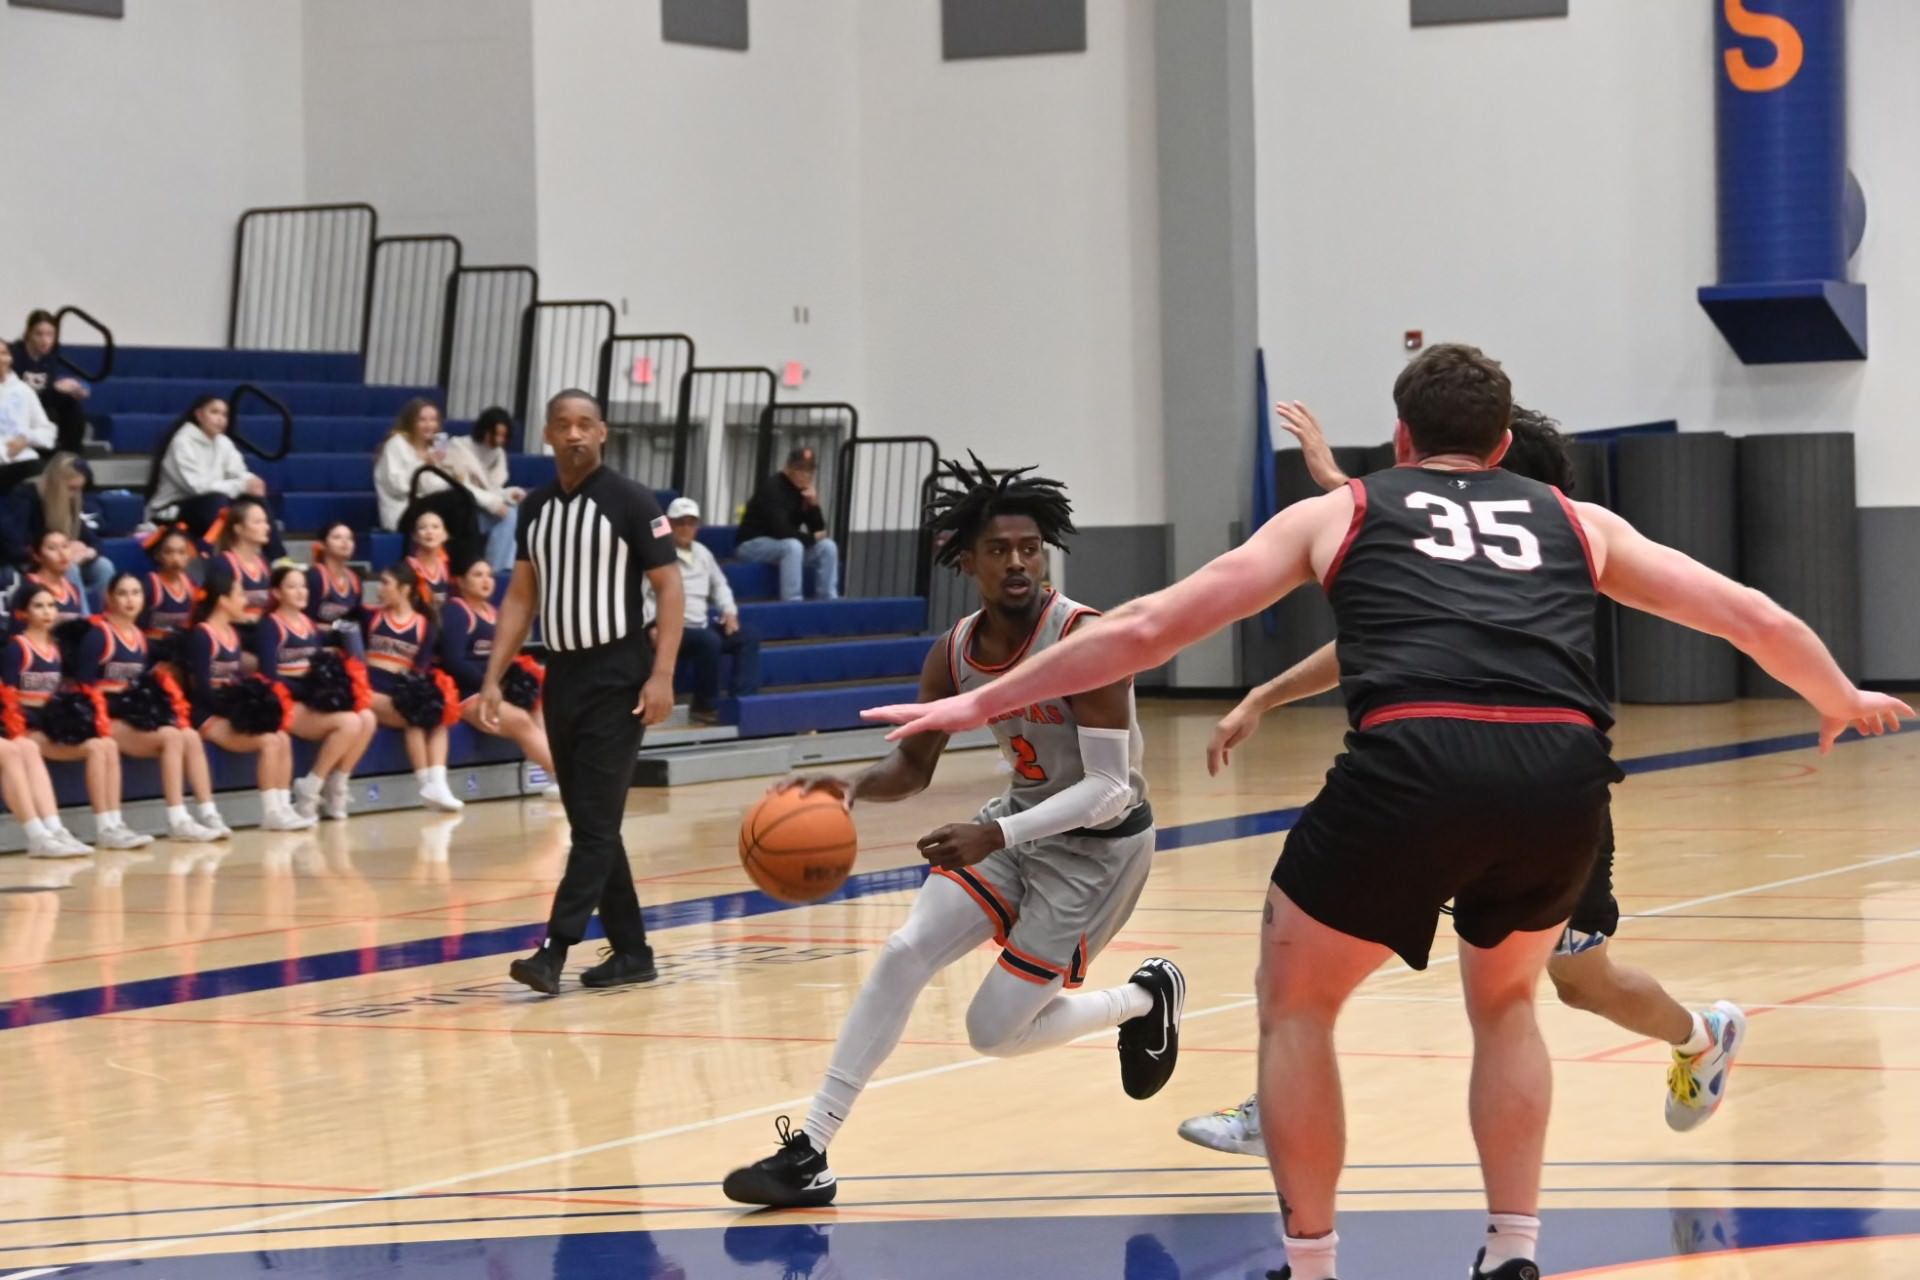 Giants remain in CVC men's basketball title contention with win over Porterville